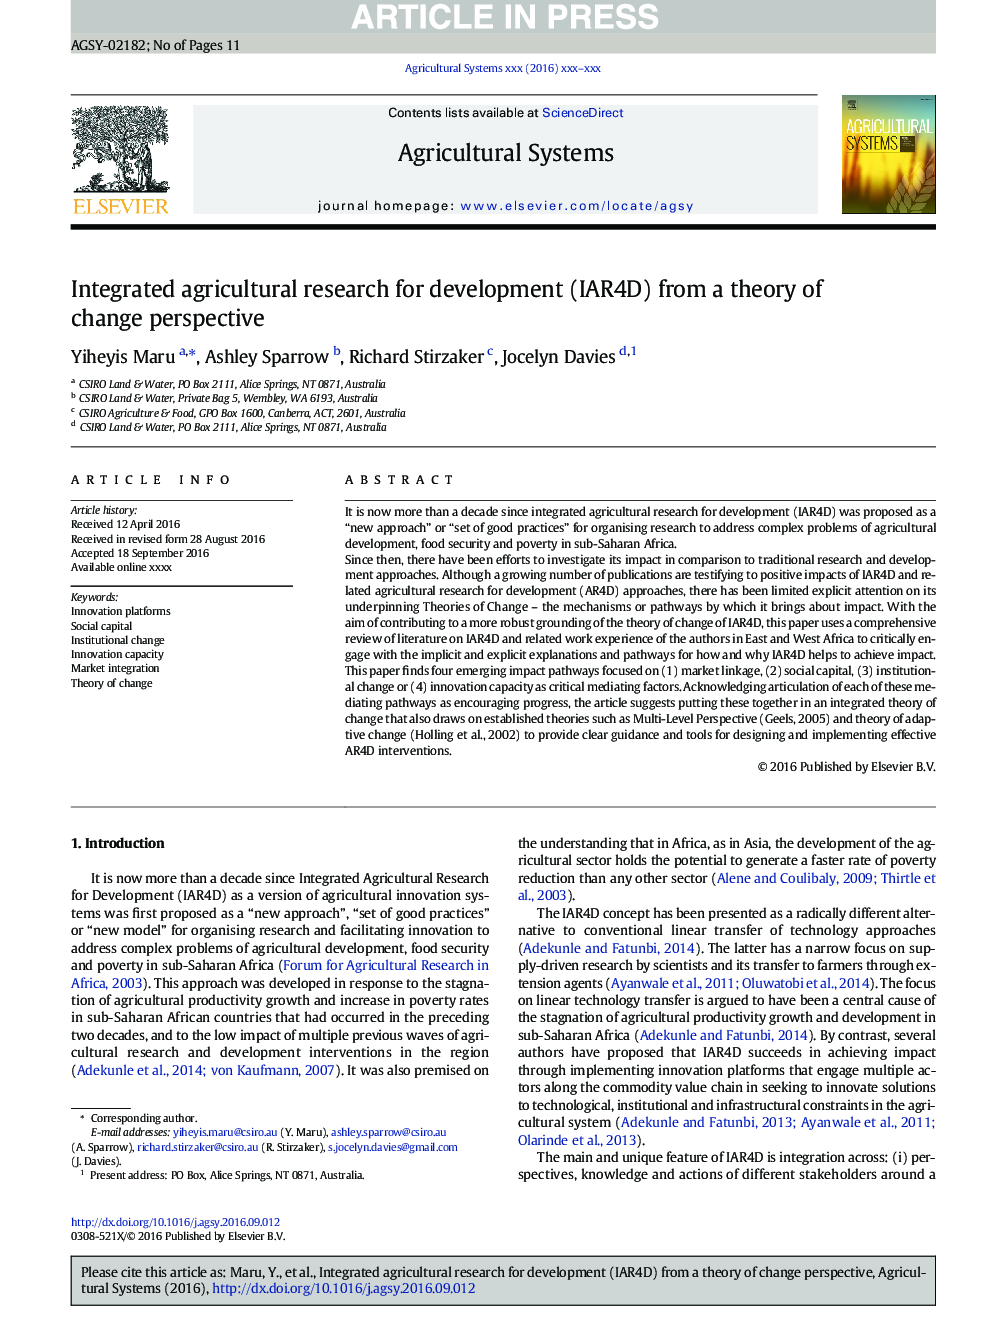 Integrated agricultural research for development (IAR4D) from a theory of change perspective